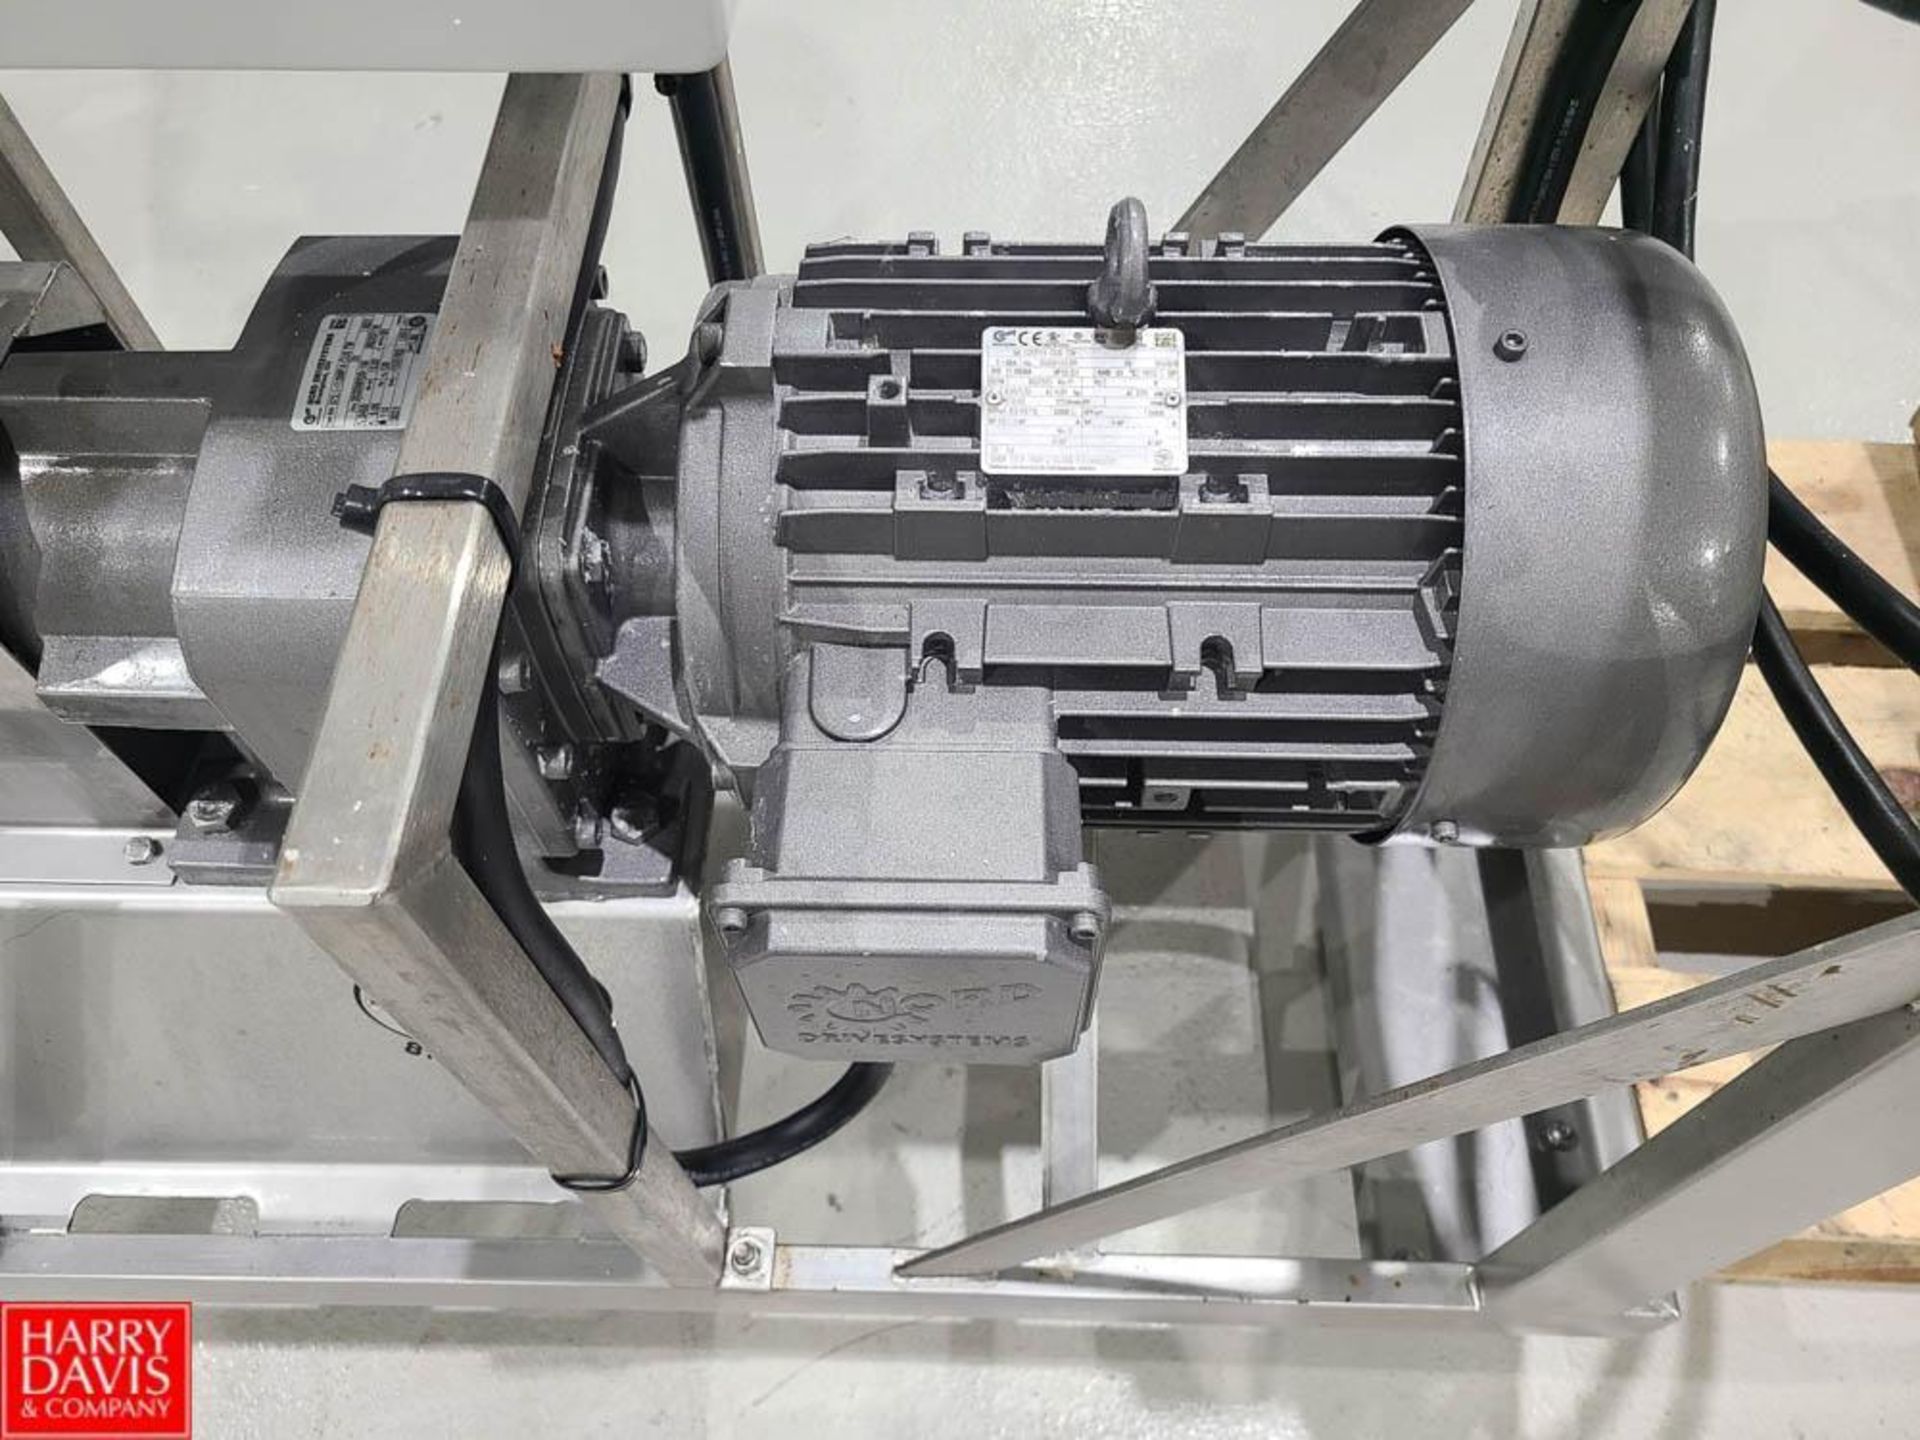 2013 SPX Portable Positive Displacement Pump, Model: 060U2 with Gear Reducing Drive and Controls - Image 4 of 6